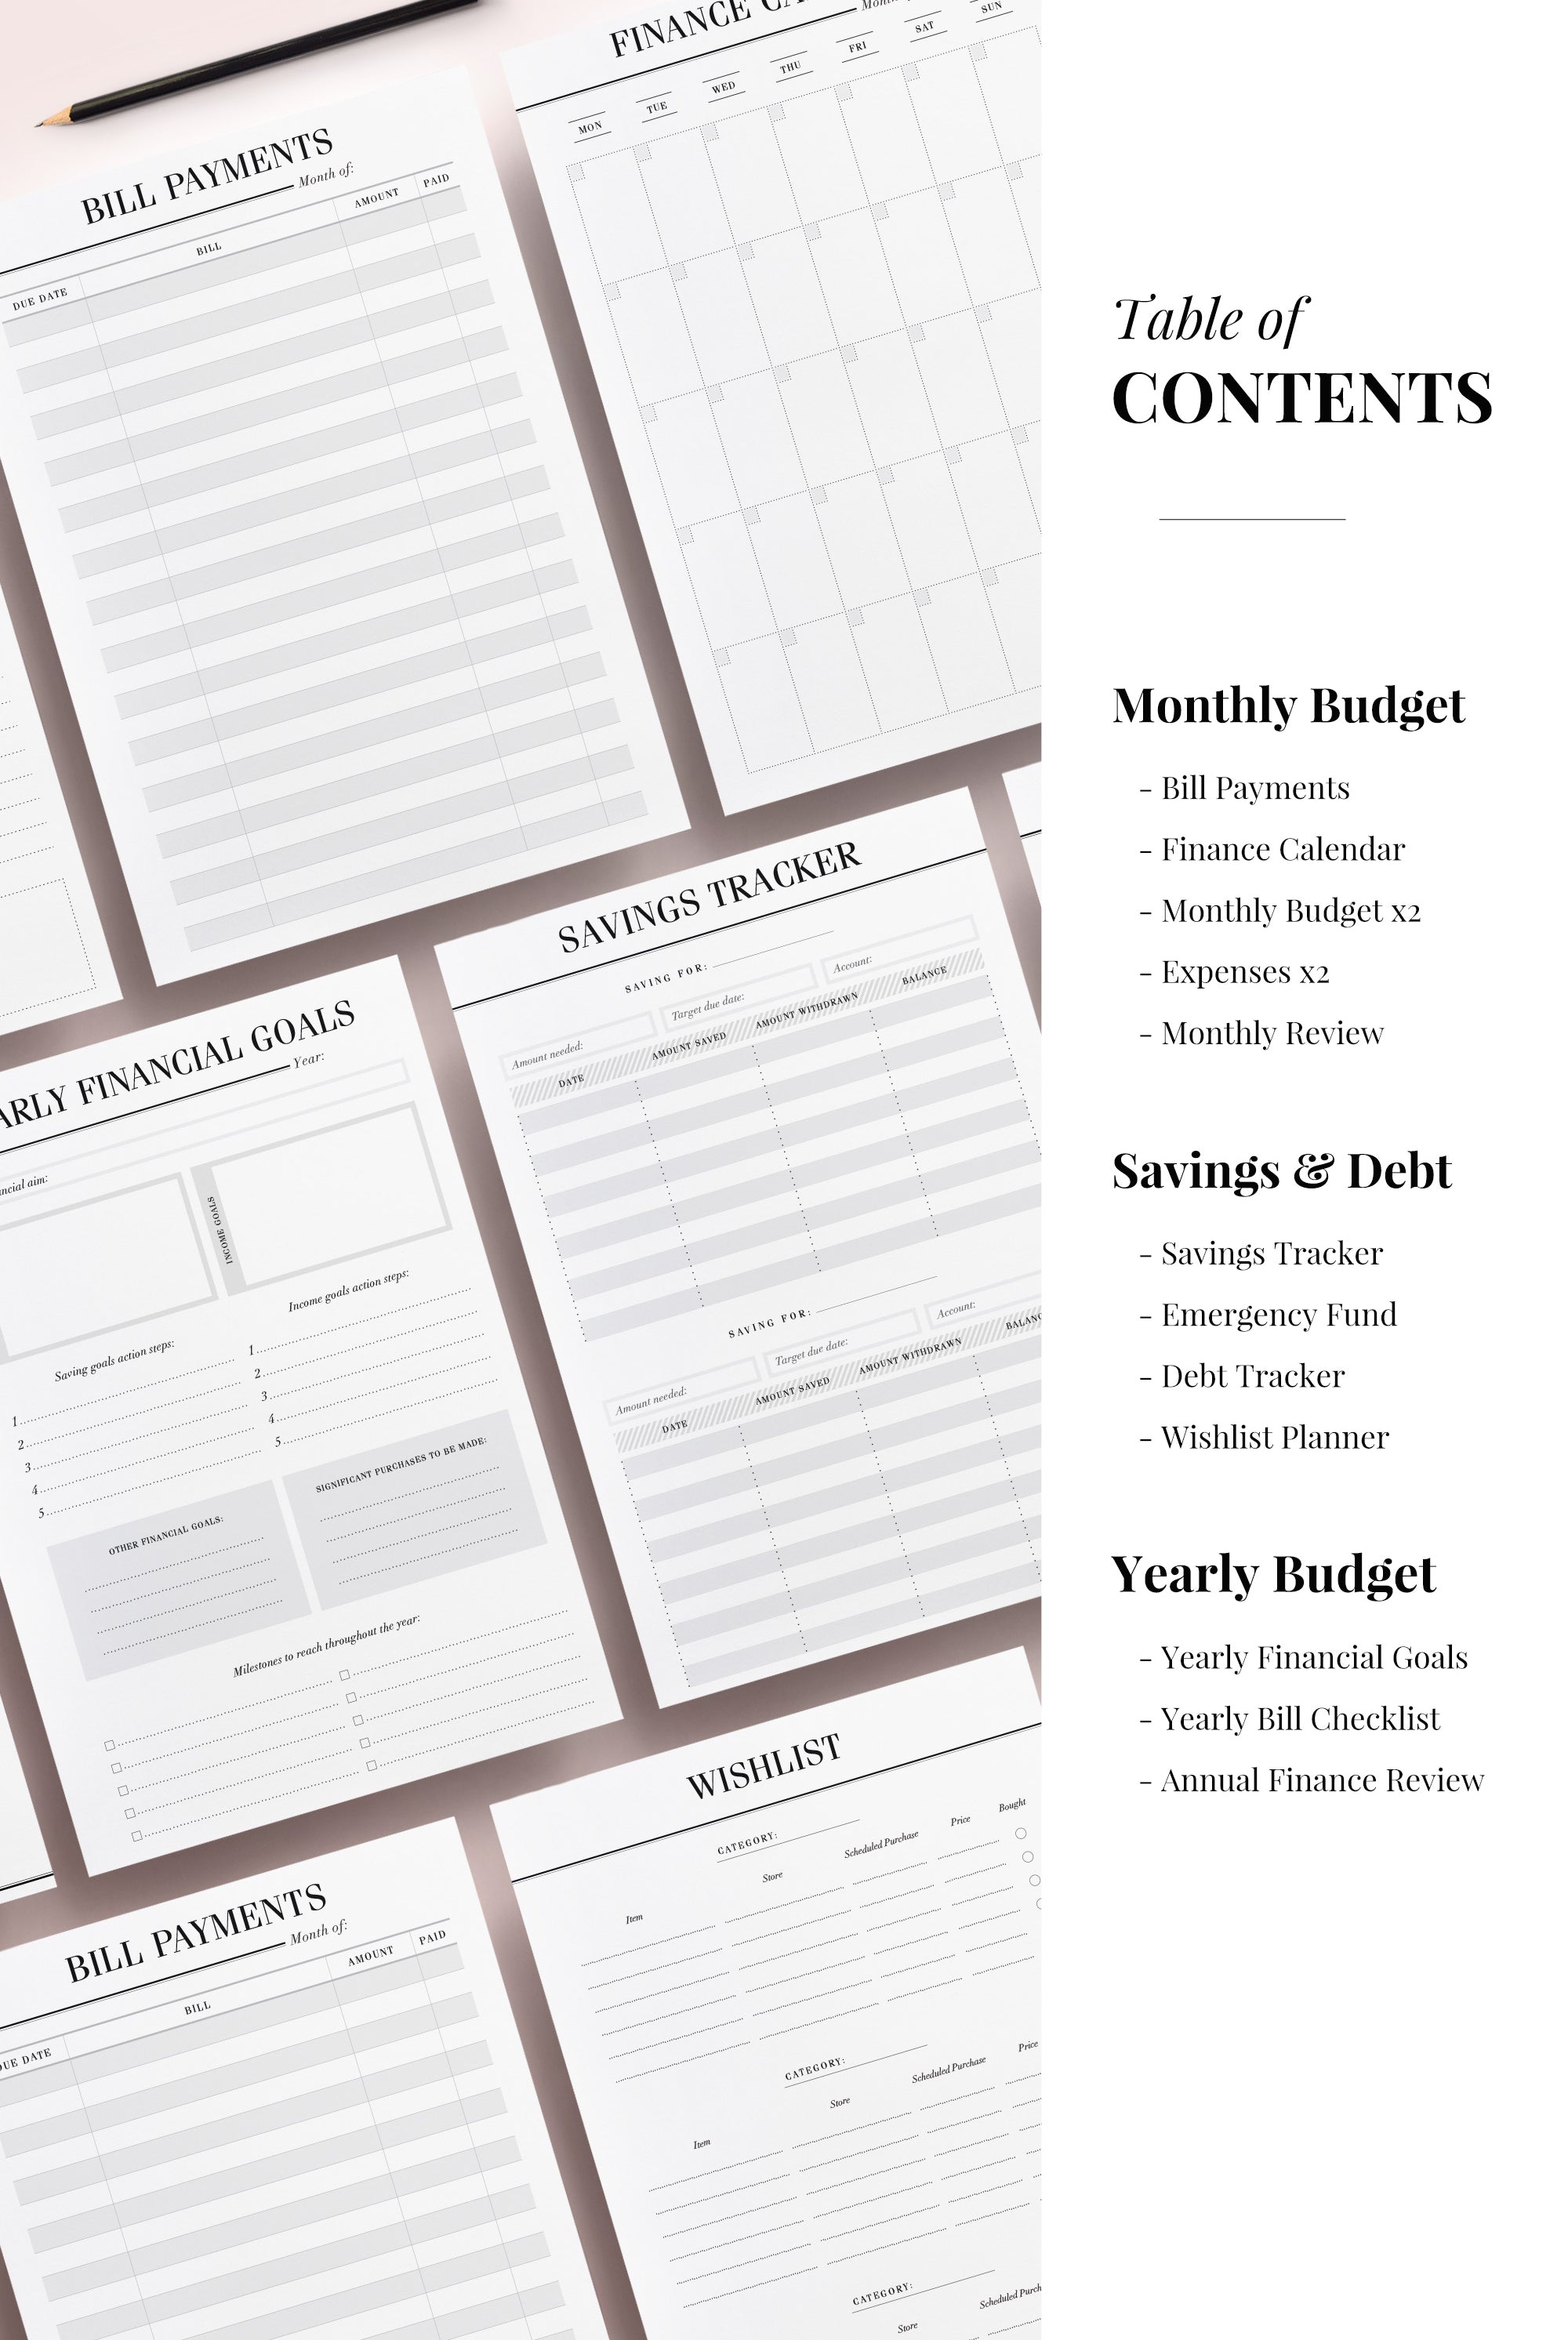 crossbow planner co printables